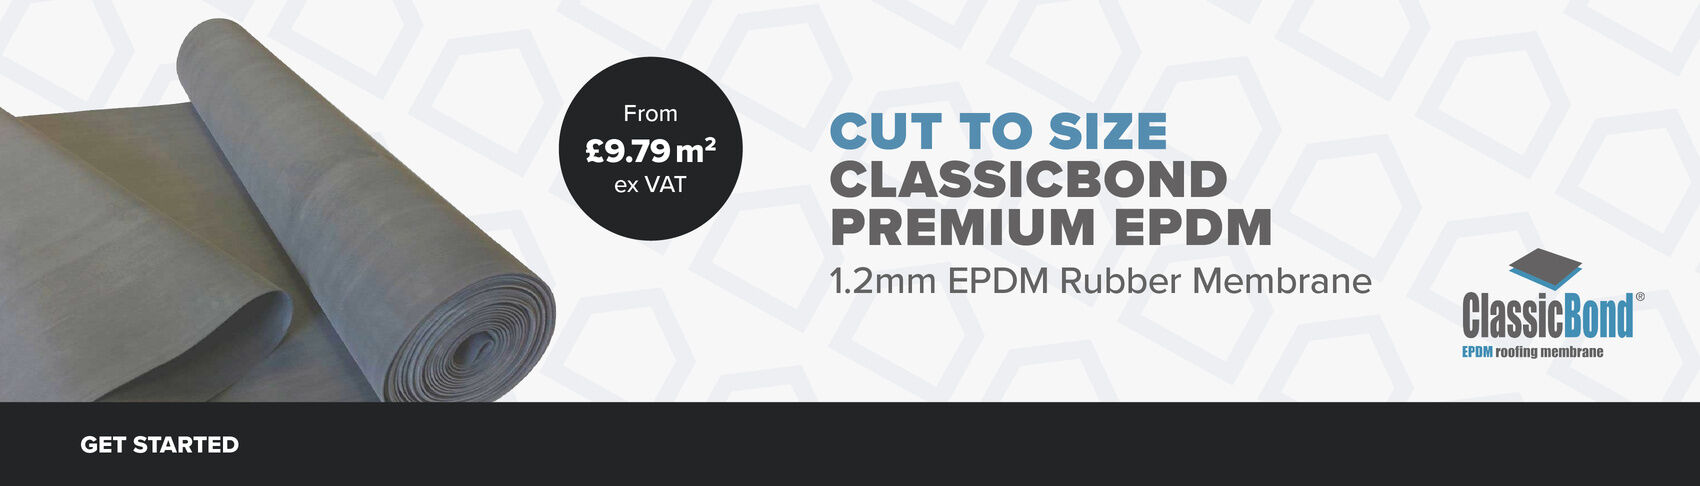 Cut To Size Classicbond EPDM